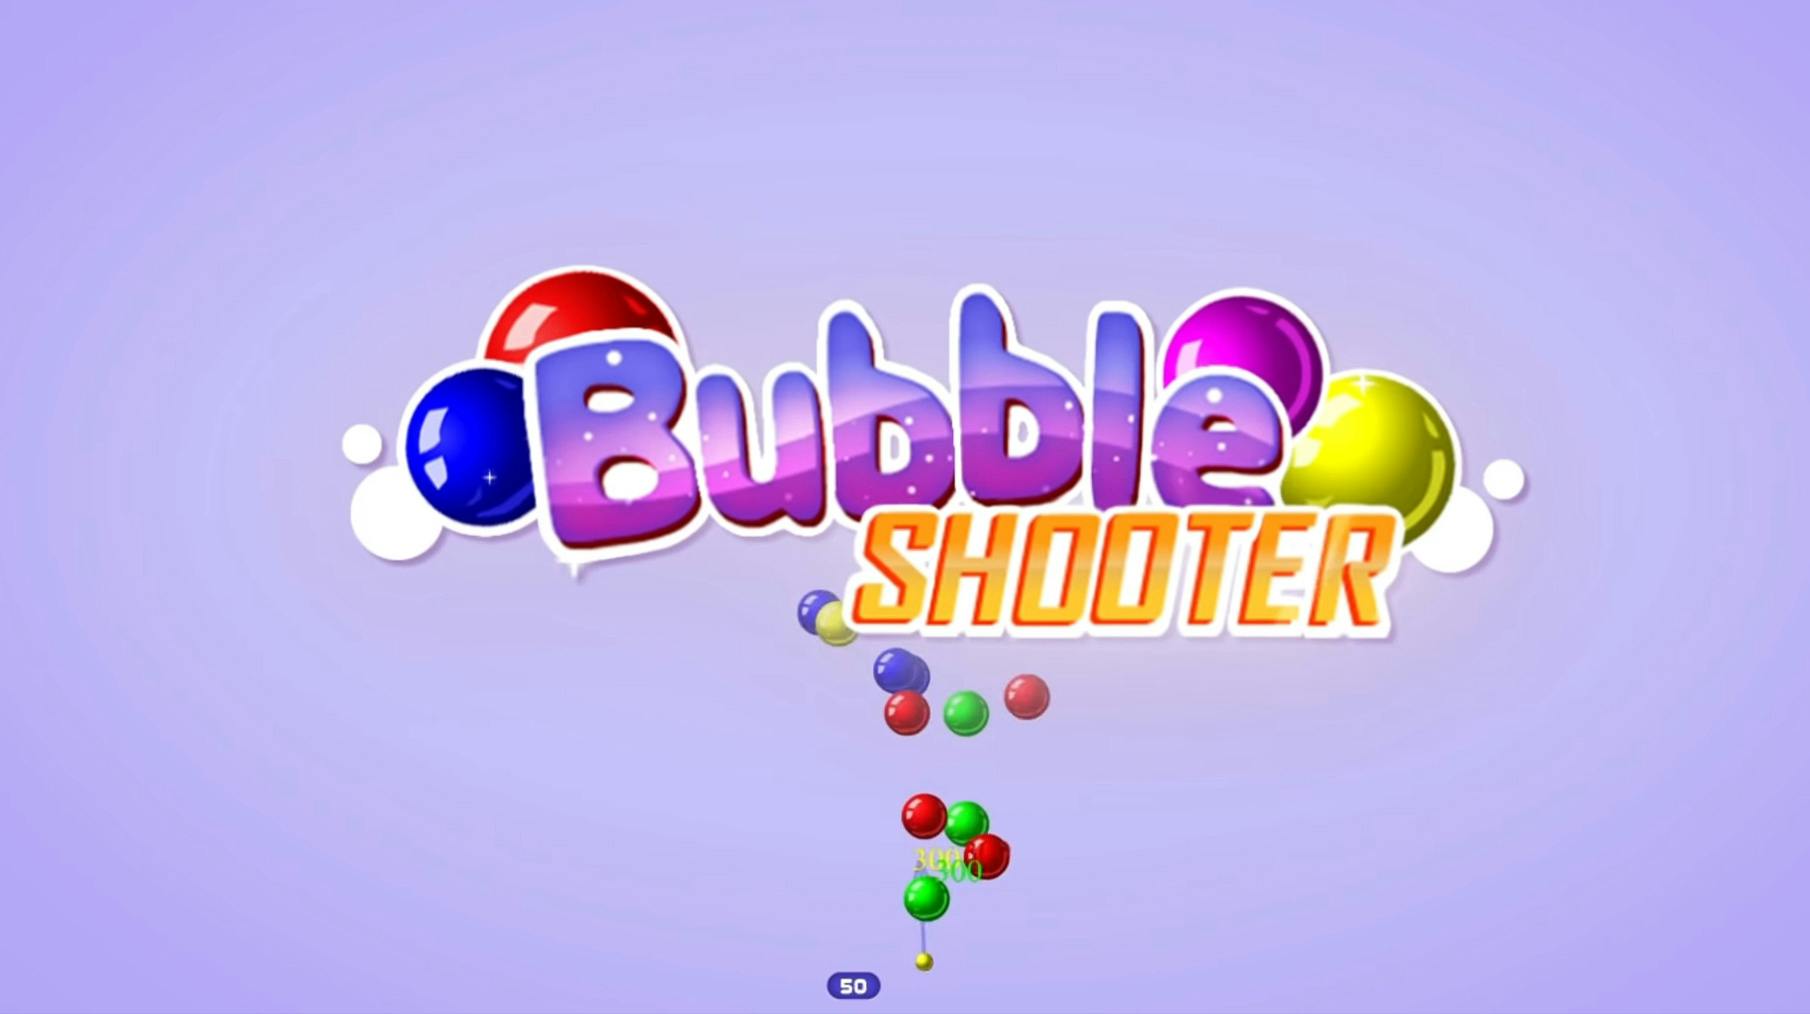 Monetization models for mobile games - Bubble shooter